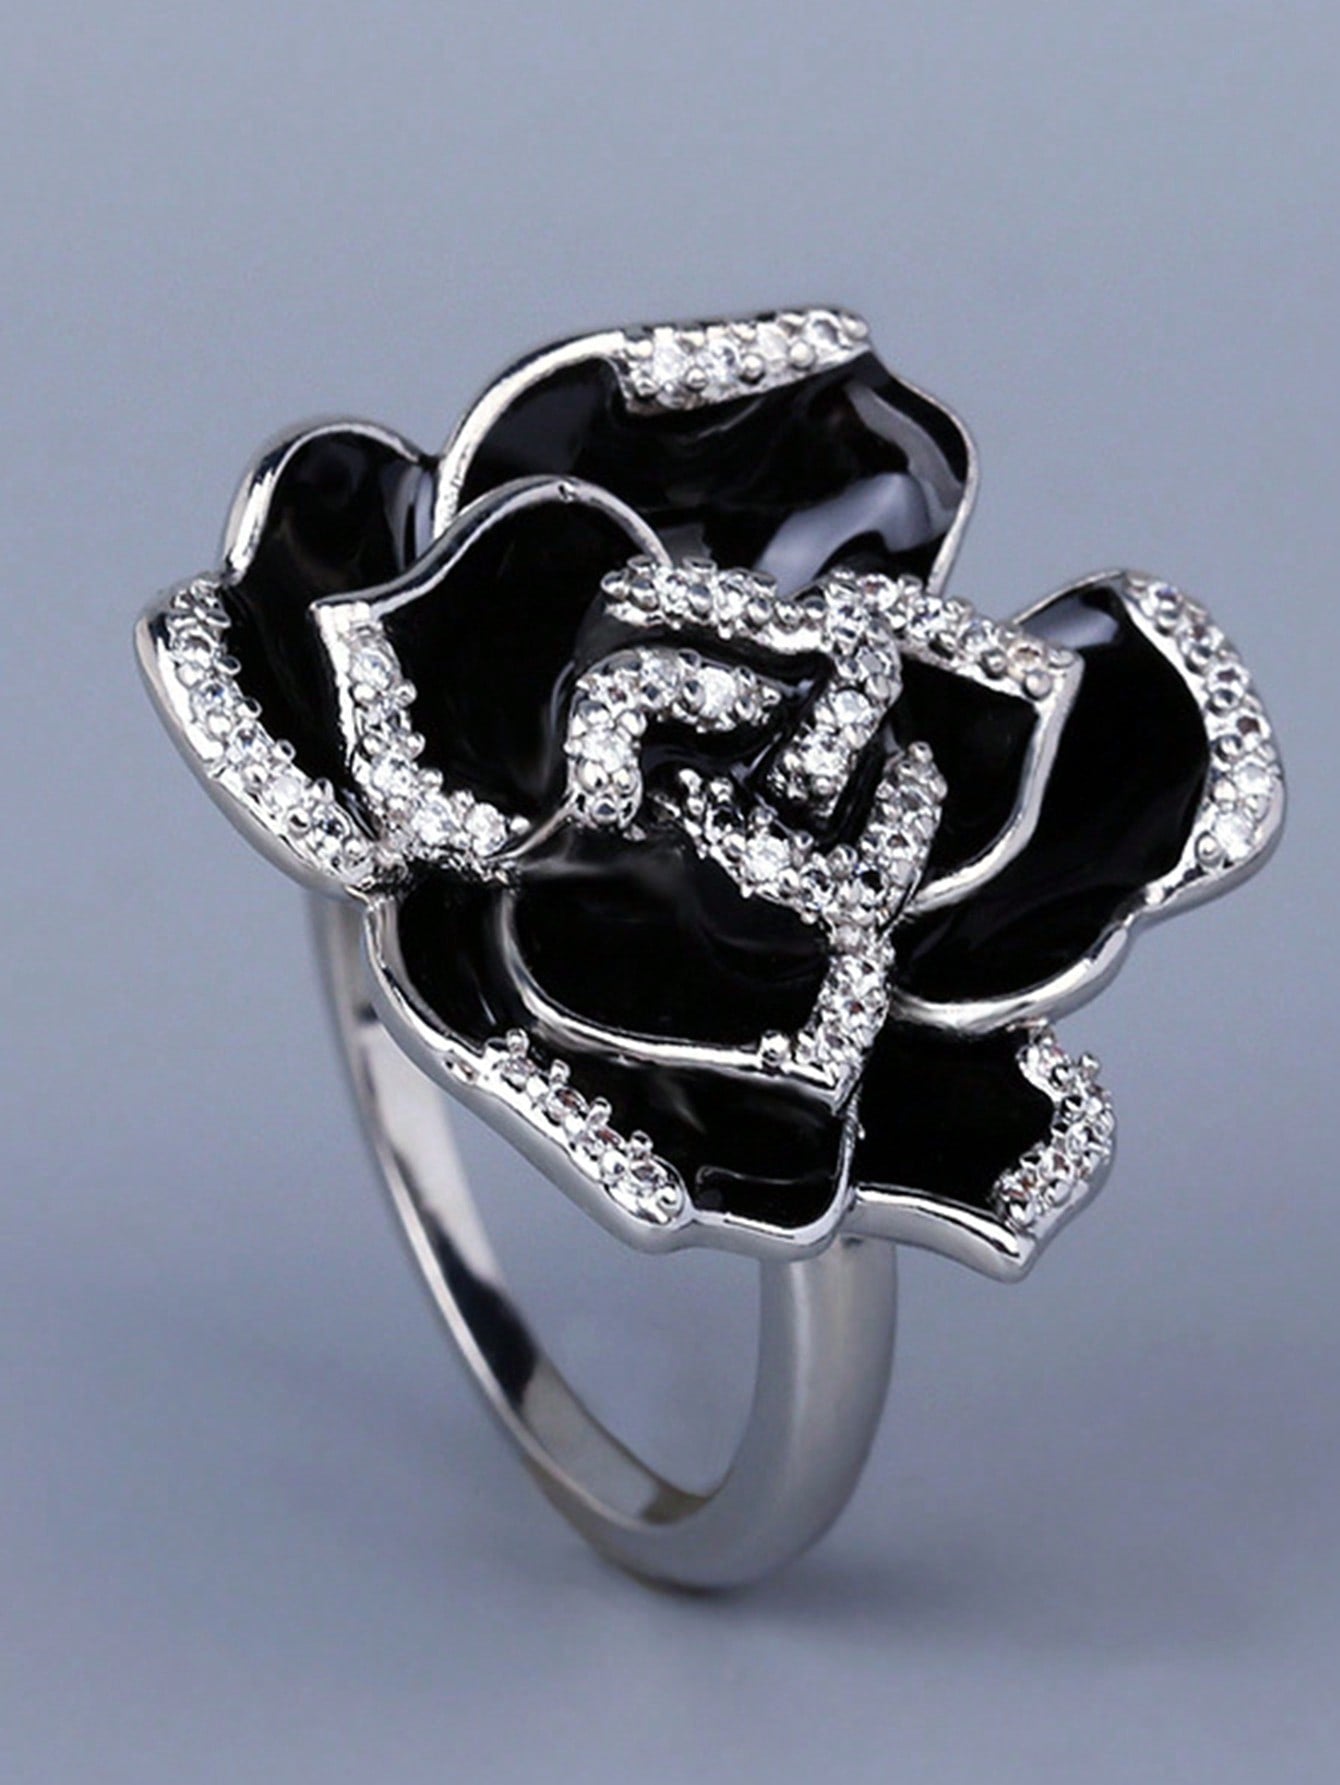 1pc Fashion Cubic Zirconia & Flower Decor Ring For Women For Party Copper Jewelry